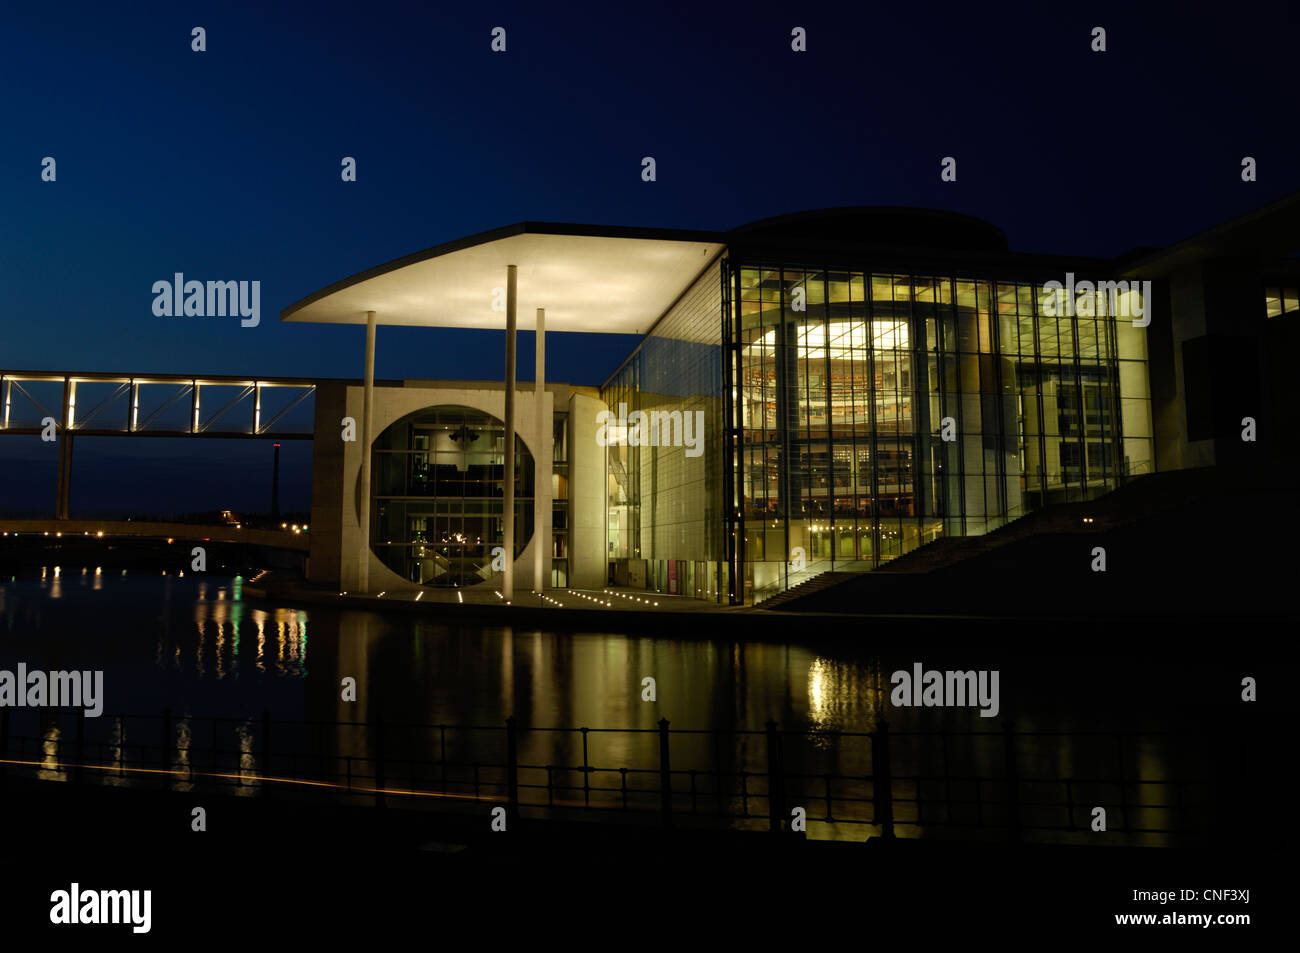 Parliamentary Library of the German Bundestag in the Spreebogen Berlin, known as 'The washing machine building' at night Stock Photo